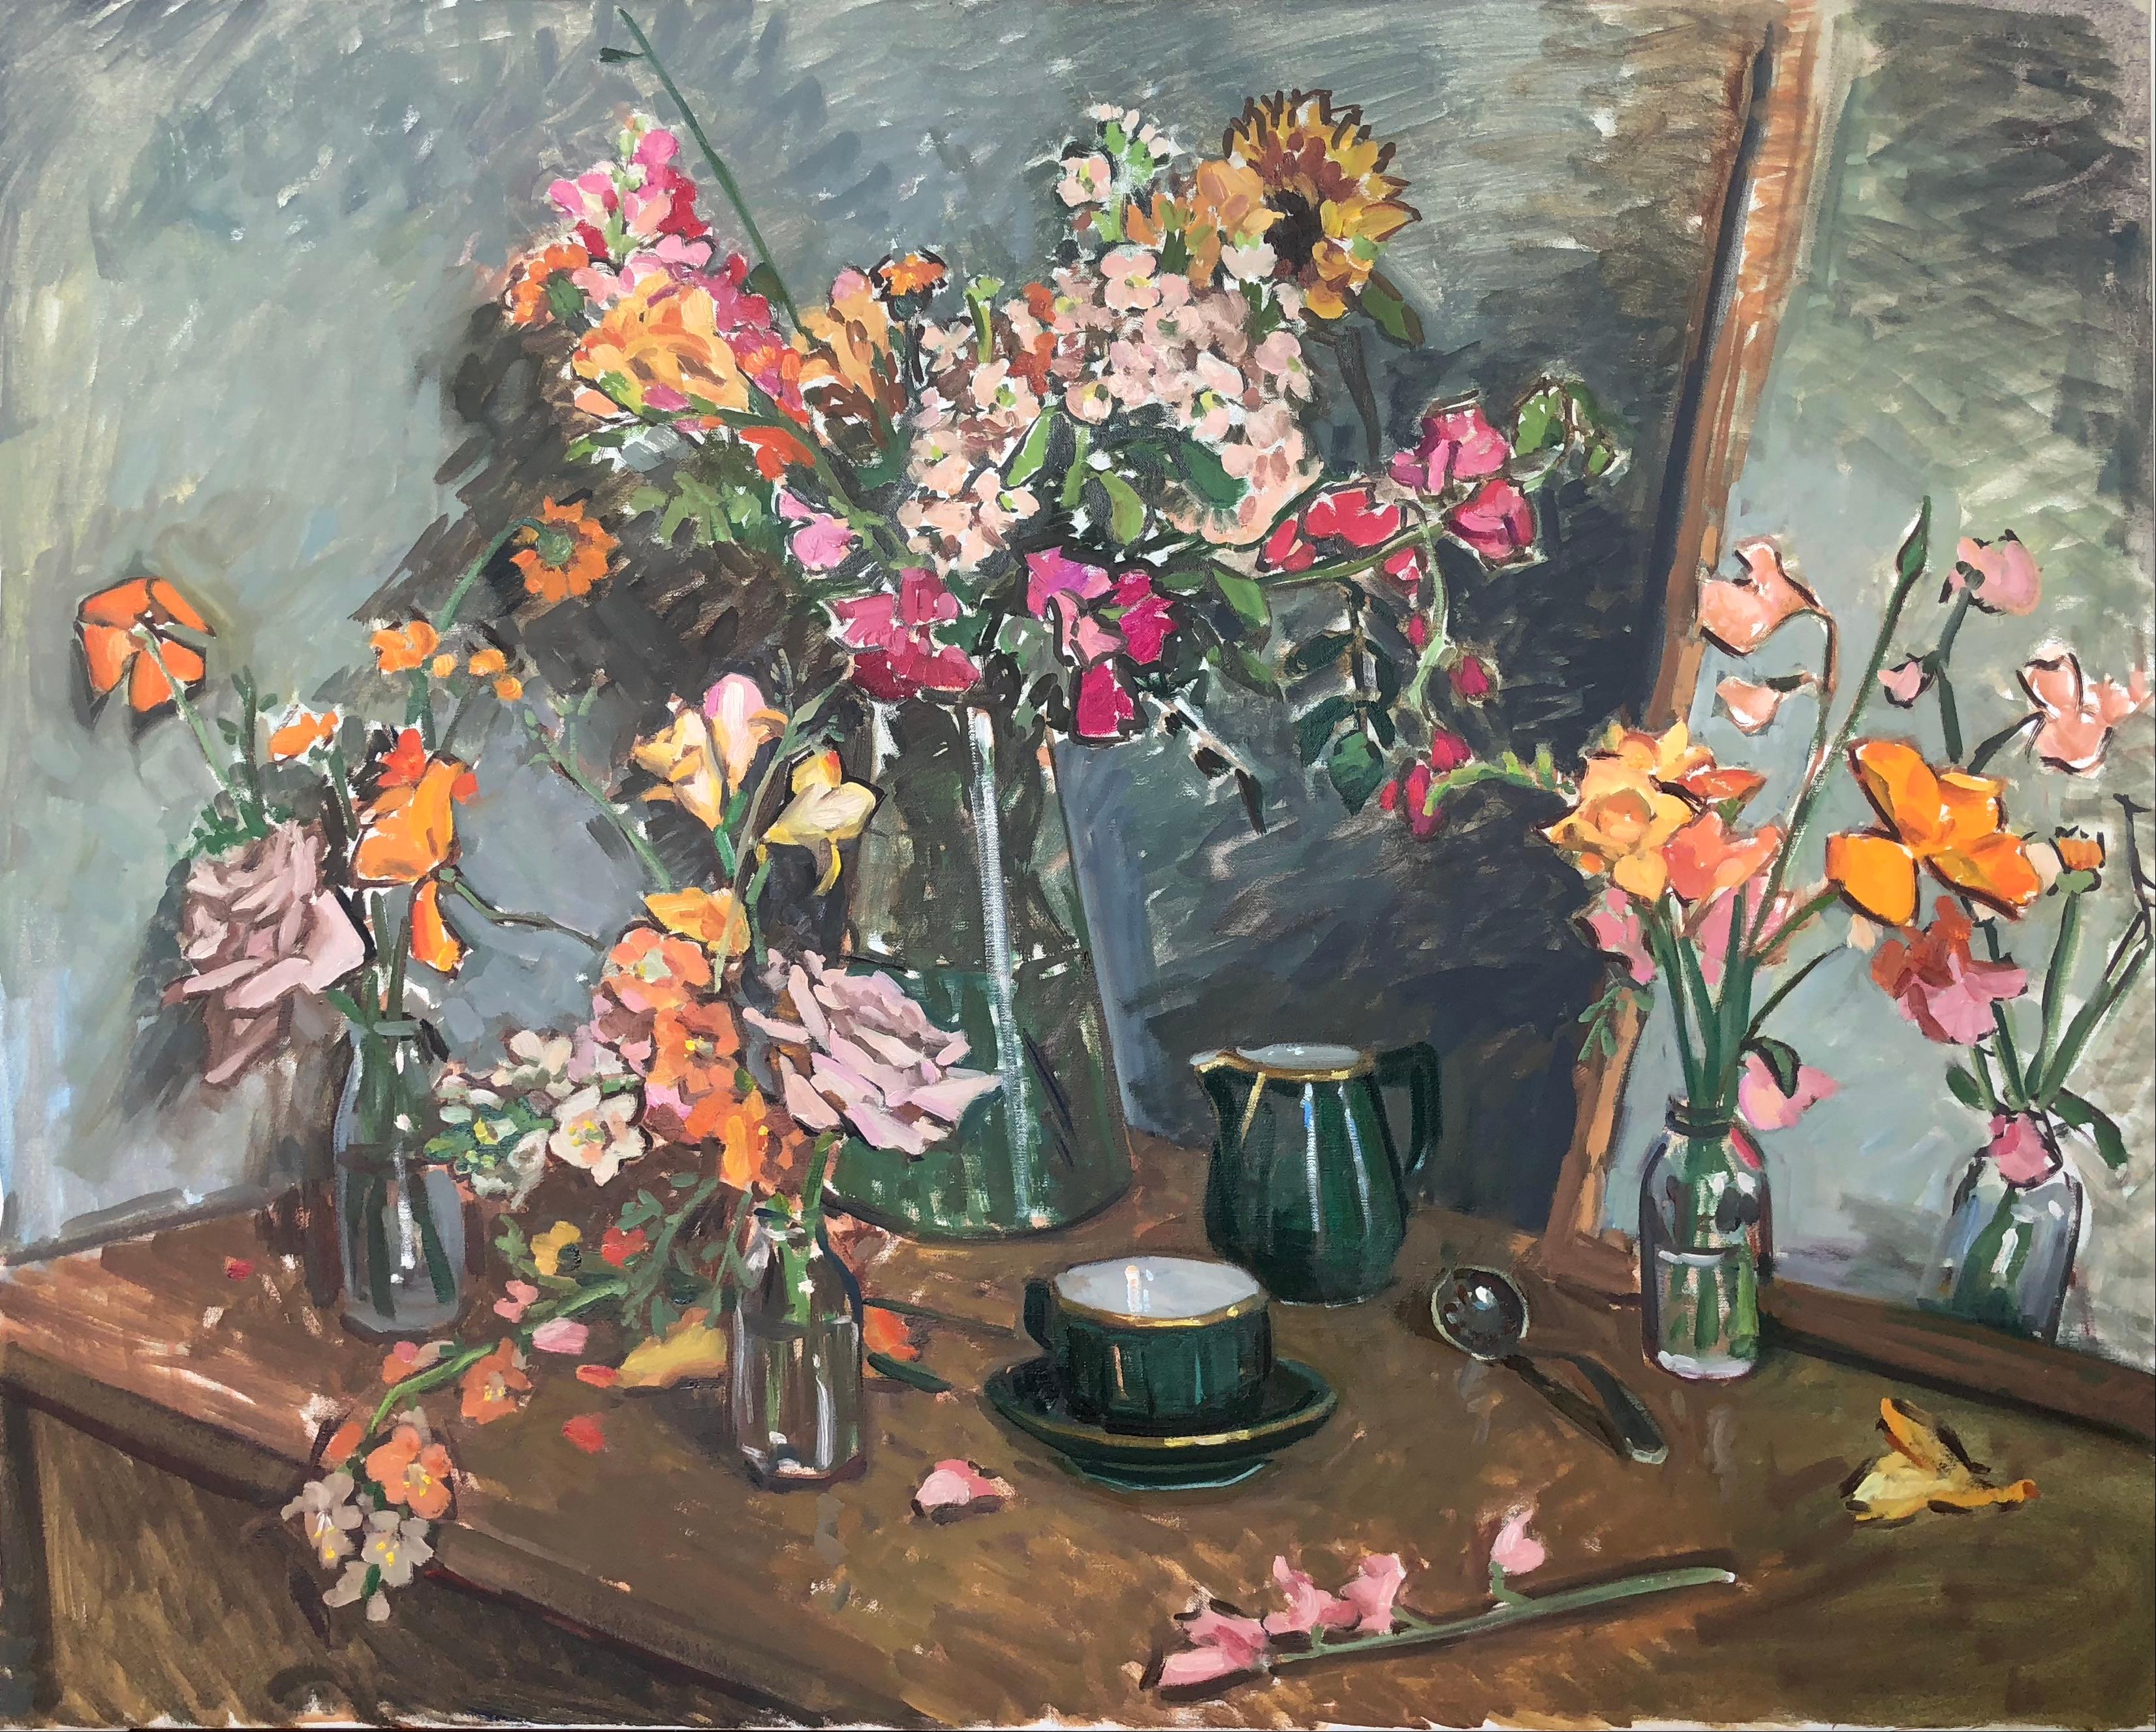 Amy Florence Interior Painting - "Wedding Flowers" Impressionist still life of colorful wildflowers and a teacup 